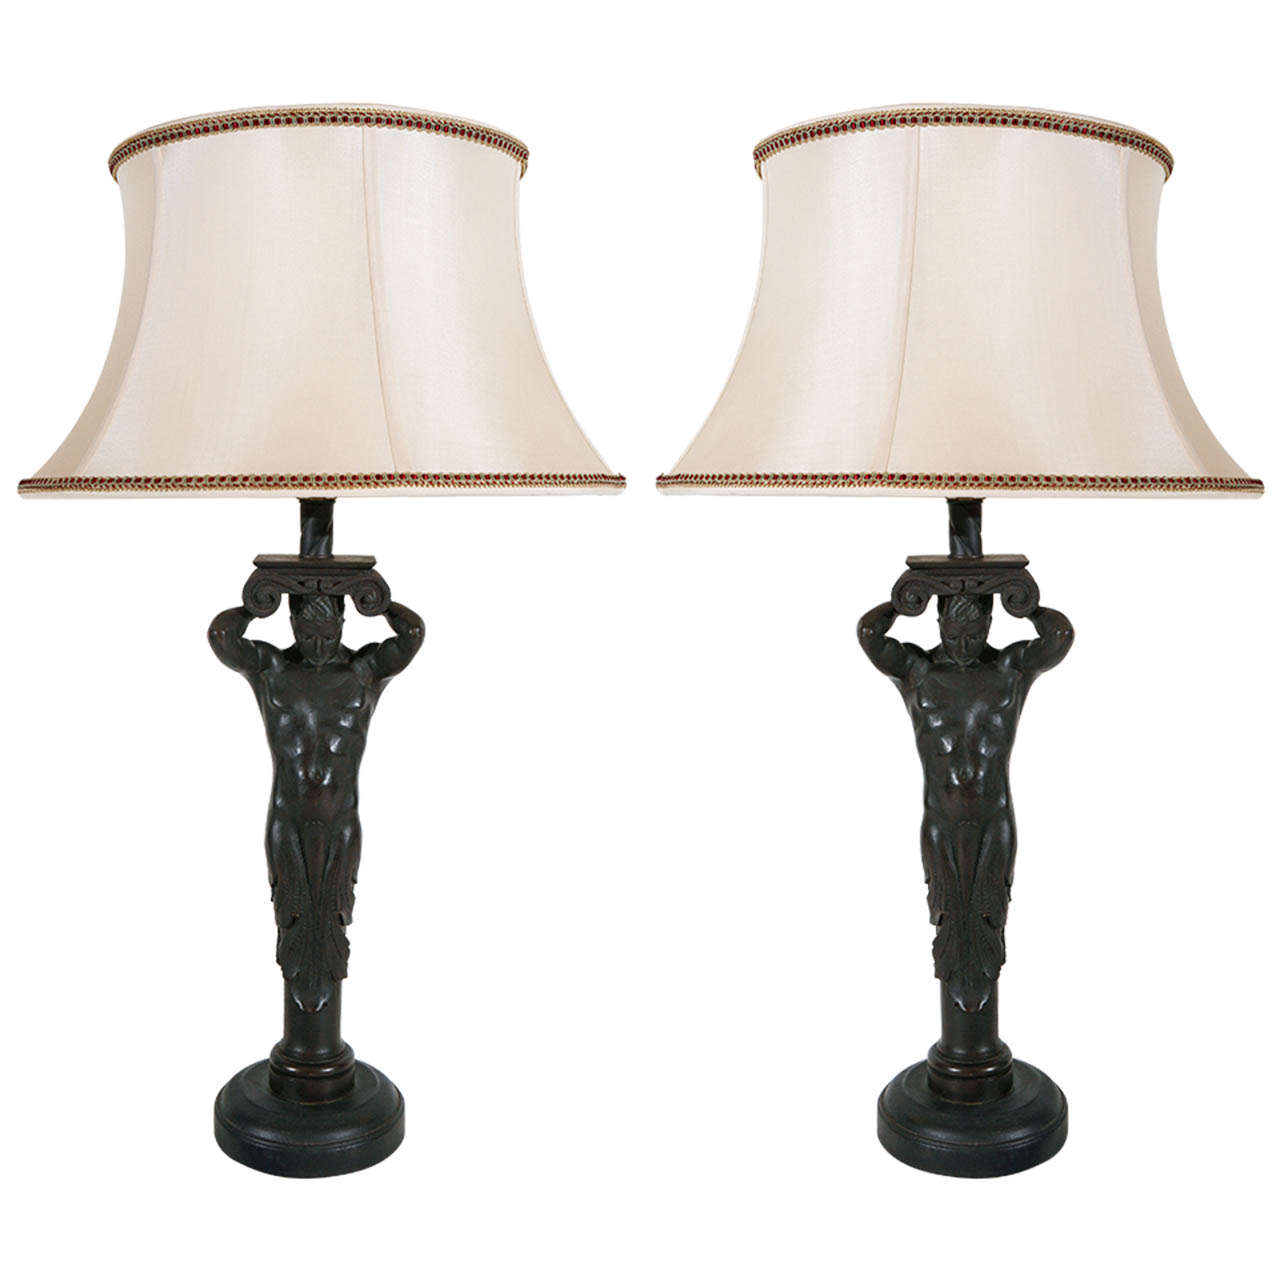 Two, Atlantid-Style Figural Lamps